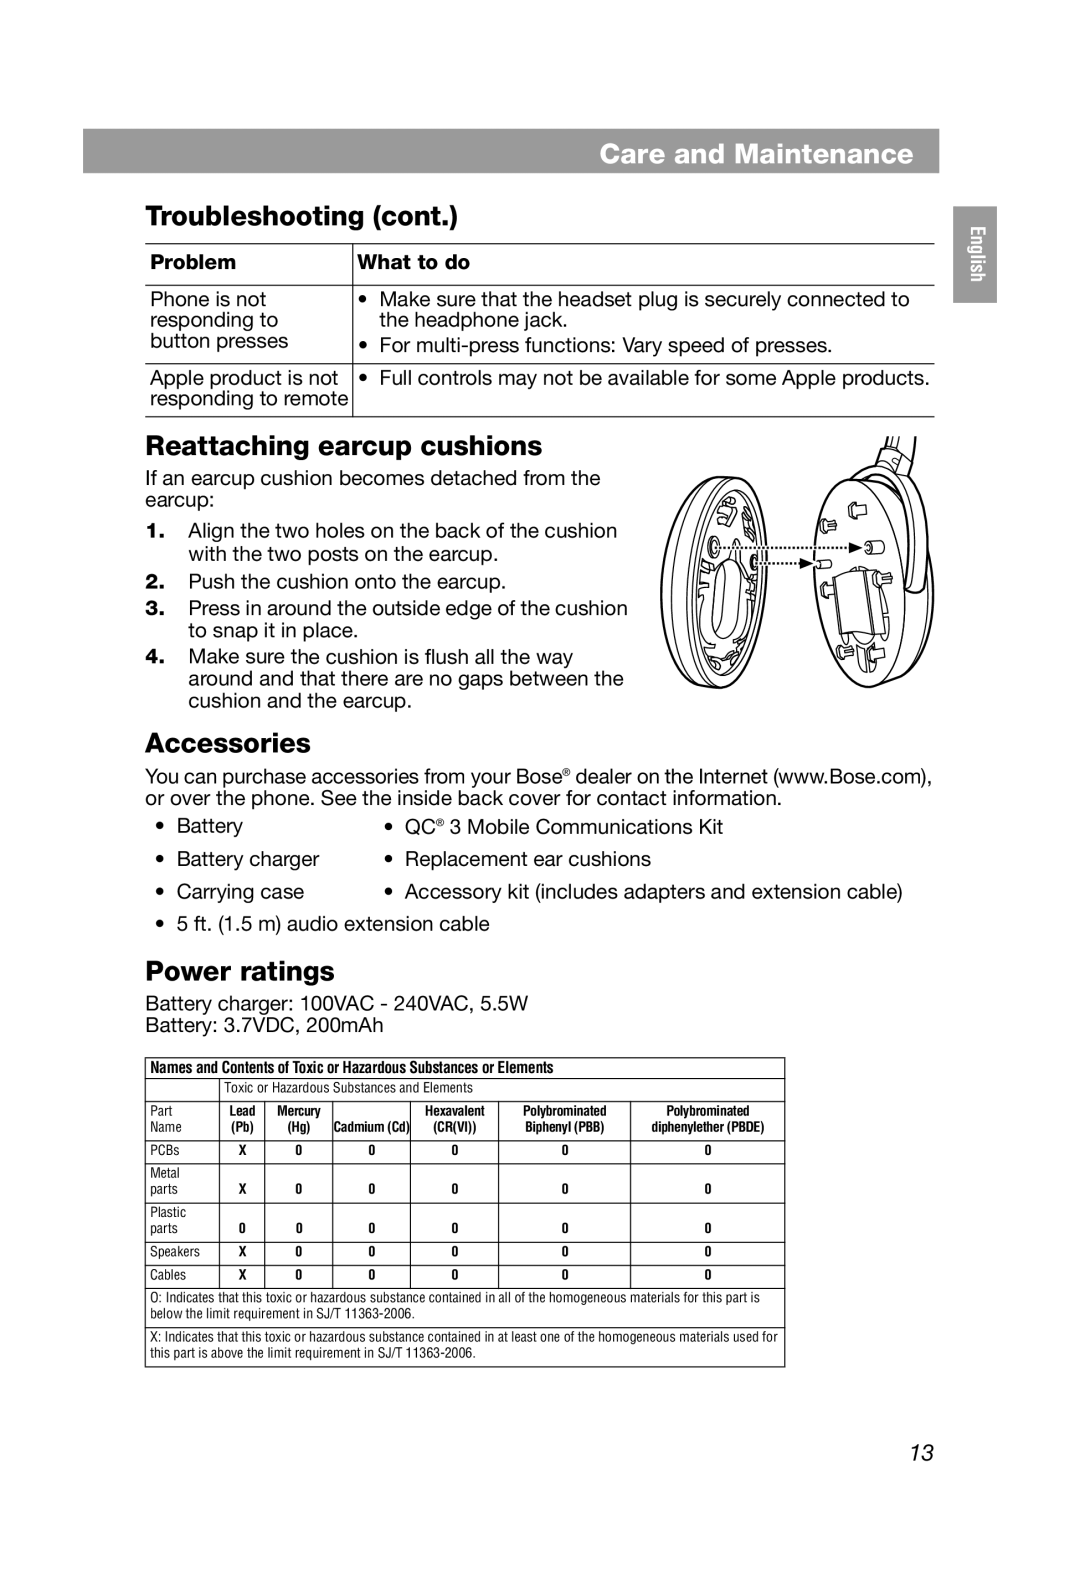 Bose QuietComfort 3 Troubleshooting cont, Reattaching earcup cushions, Accessories, Power ratings, Care and Maintenance 